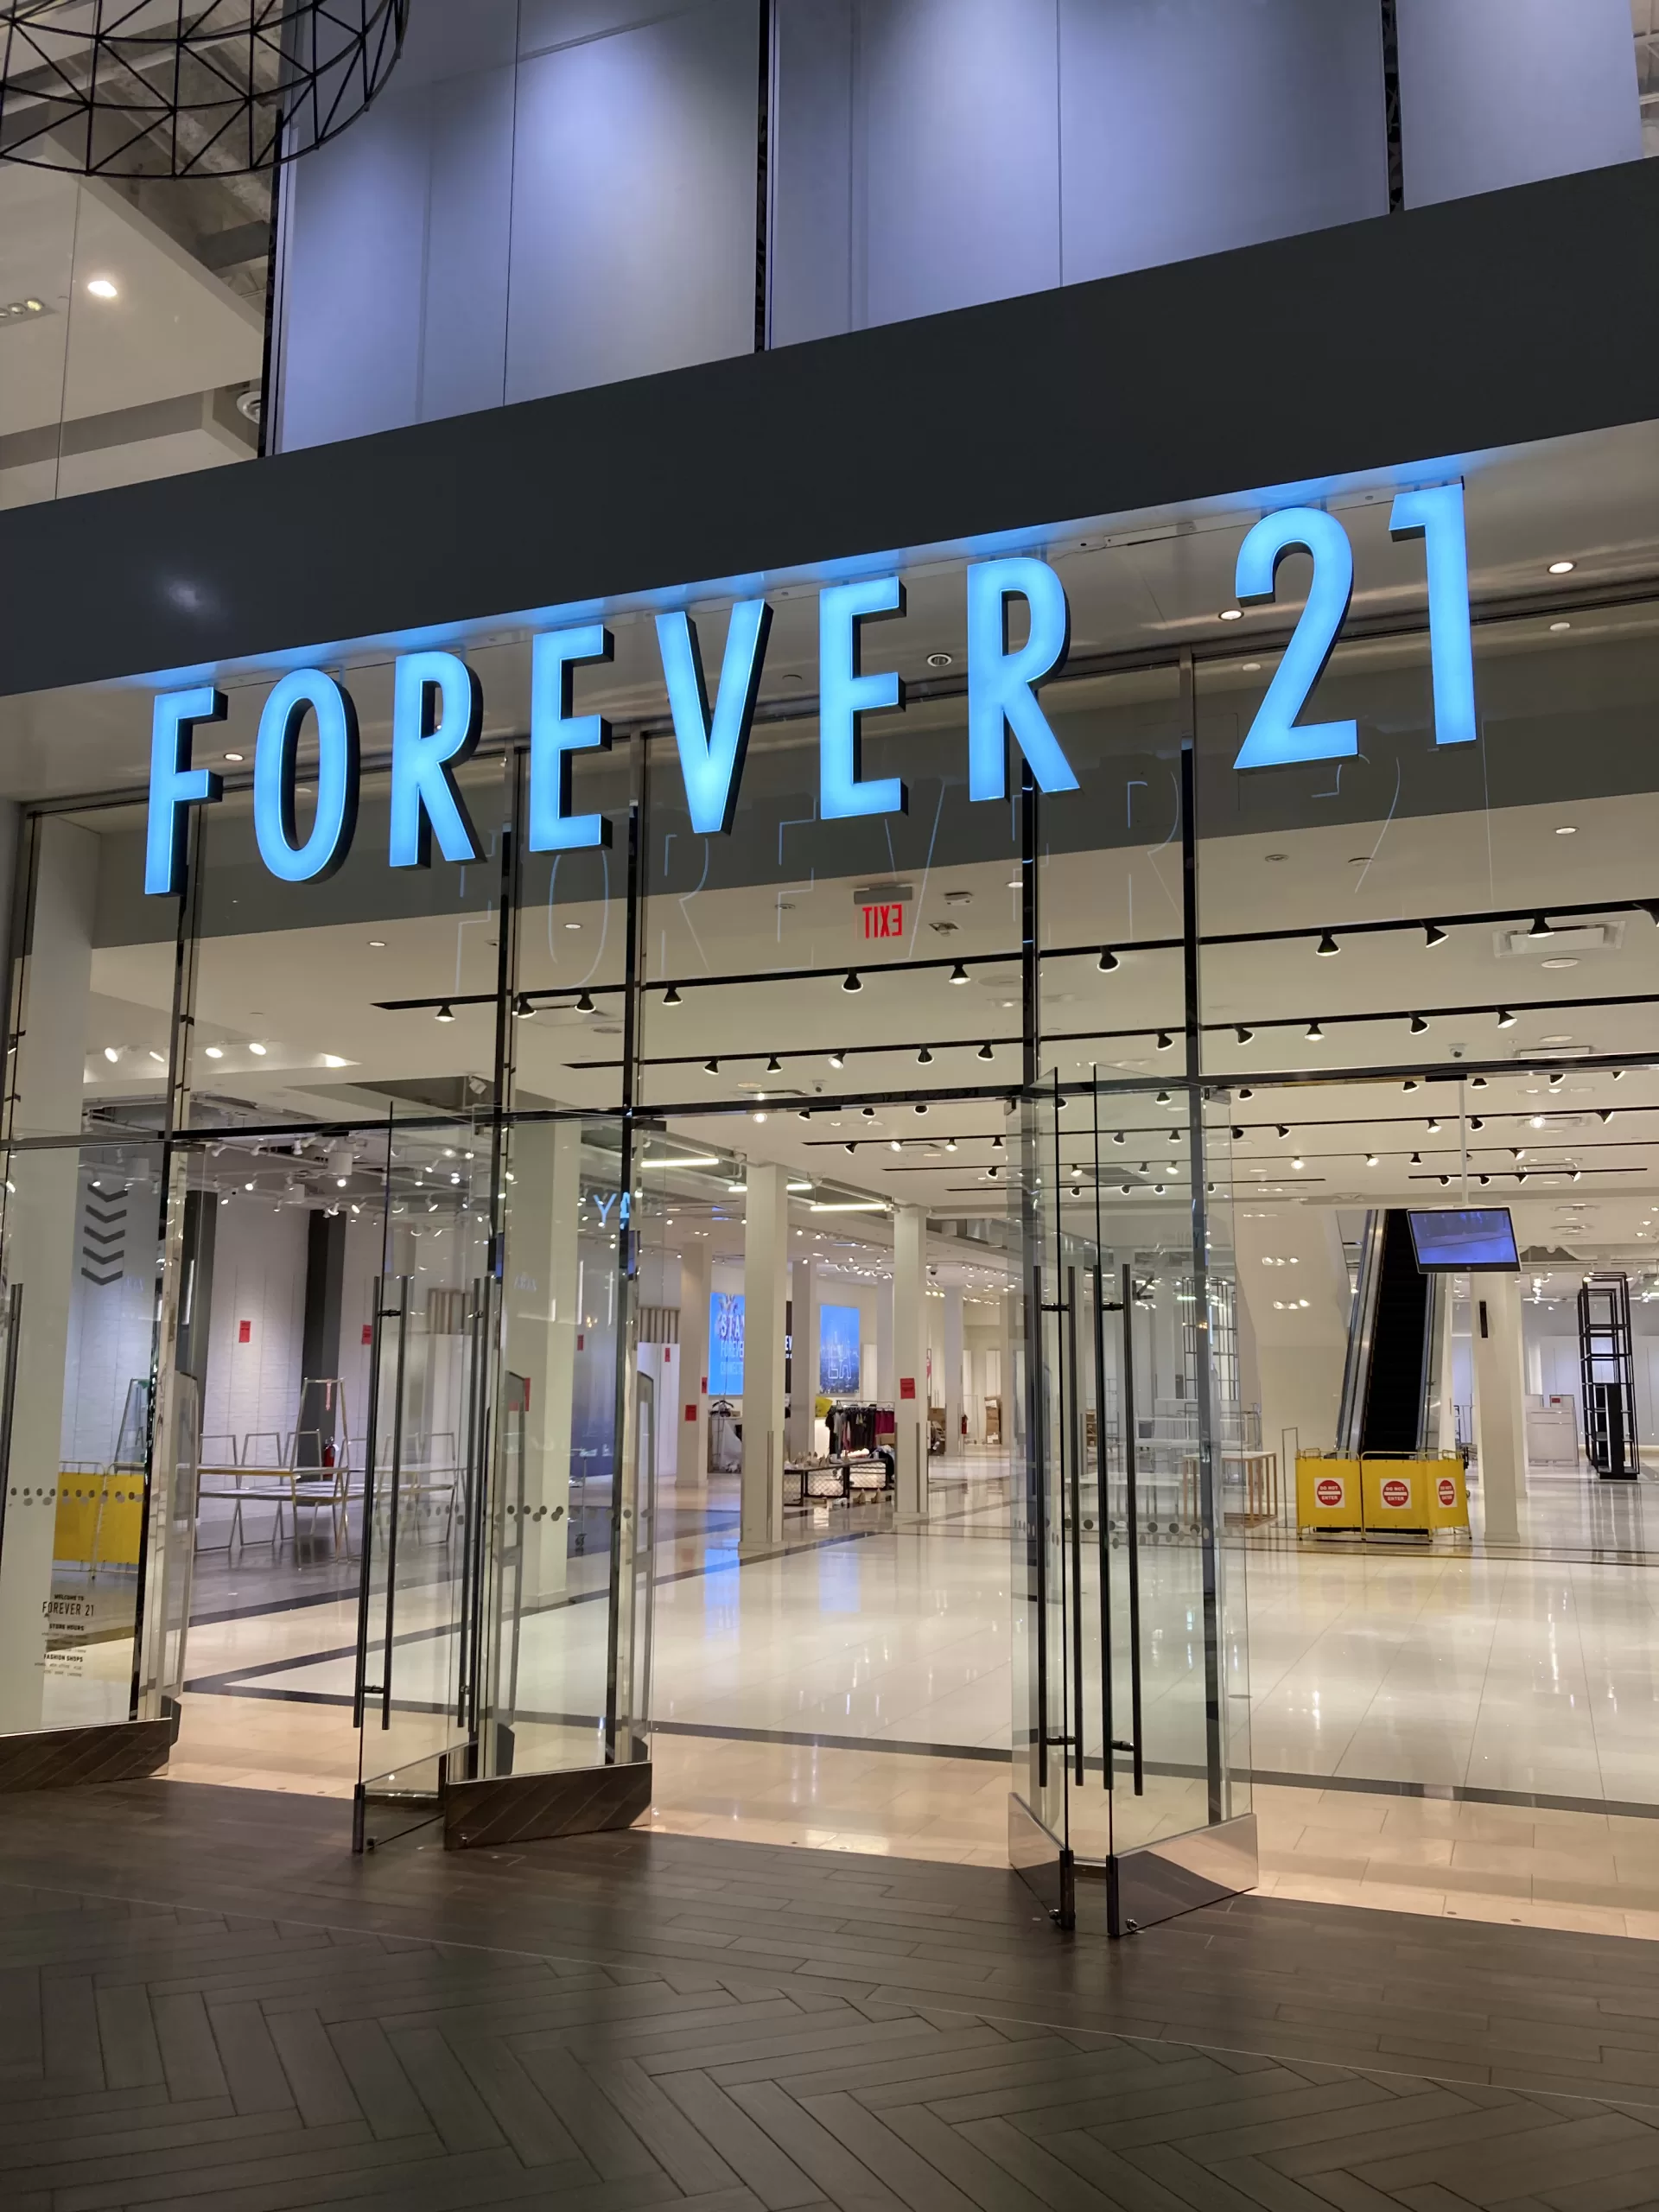 Retail News: Forever 21 closing for Uniqlo's first Houston location –  Houston Historic Retail